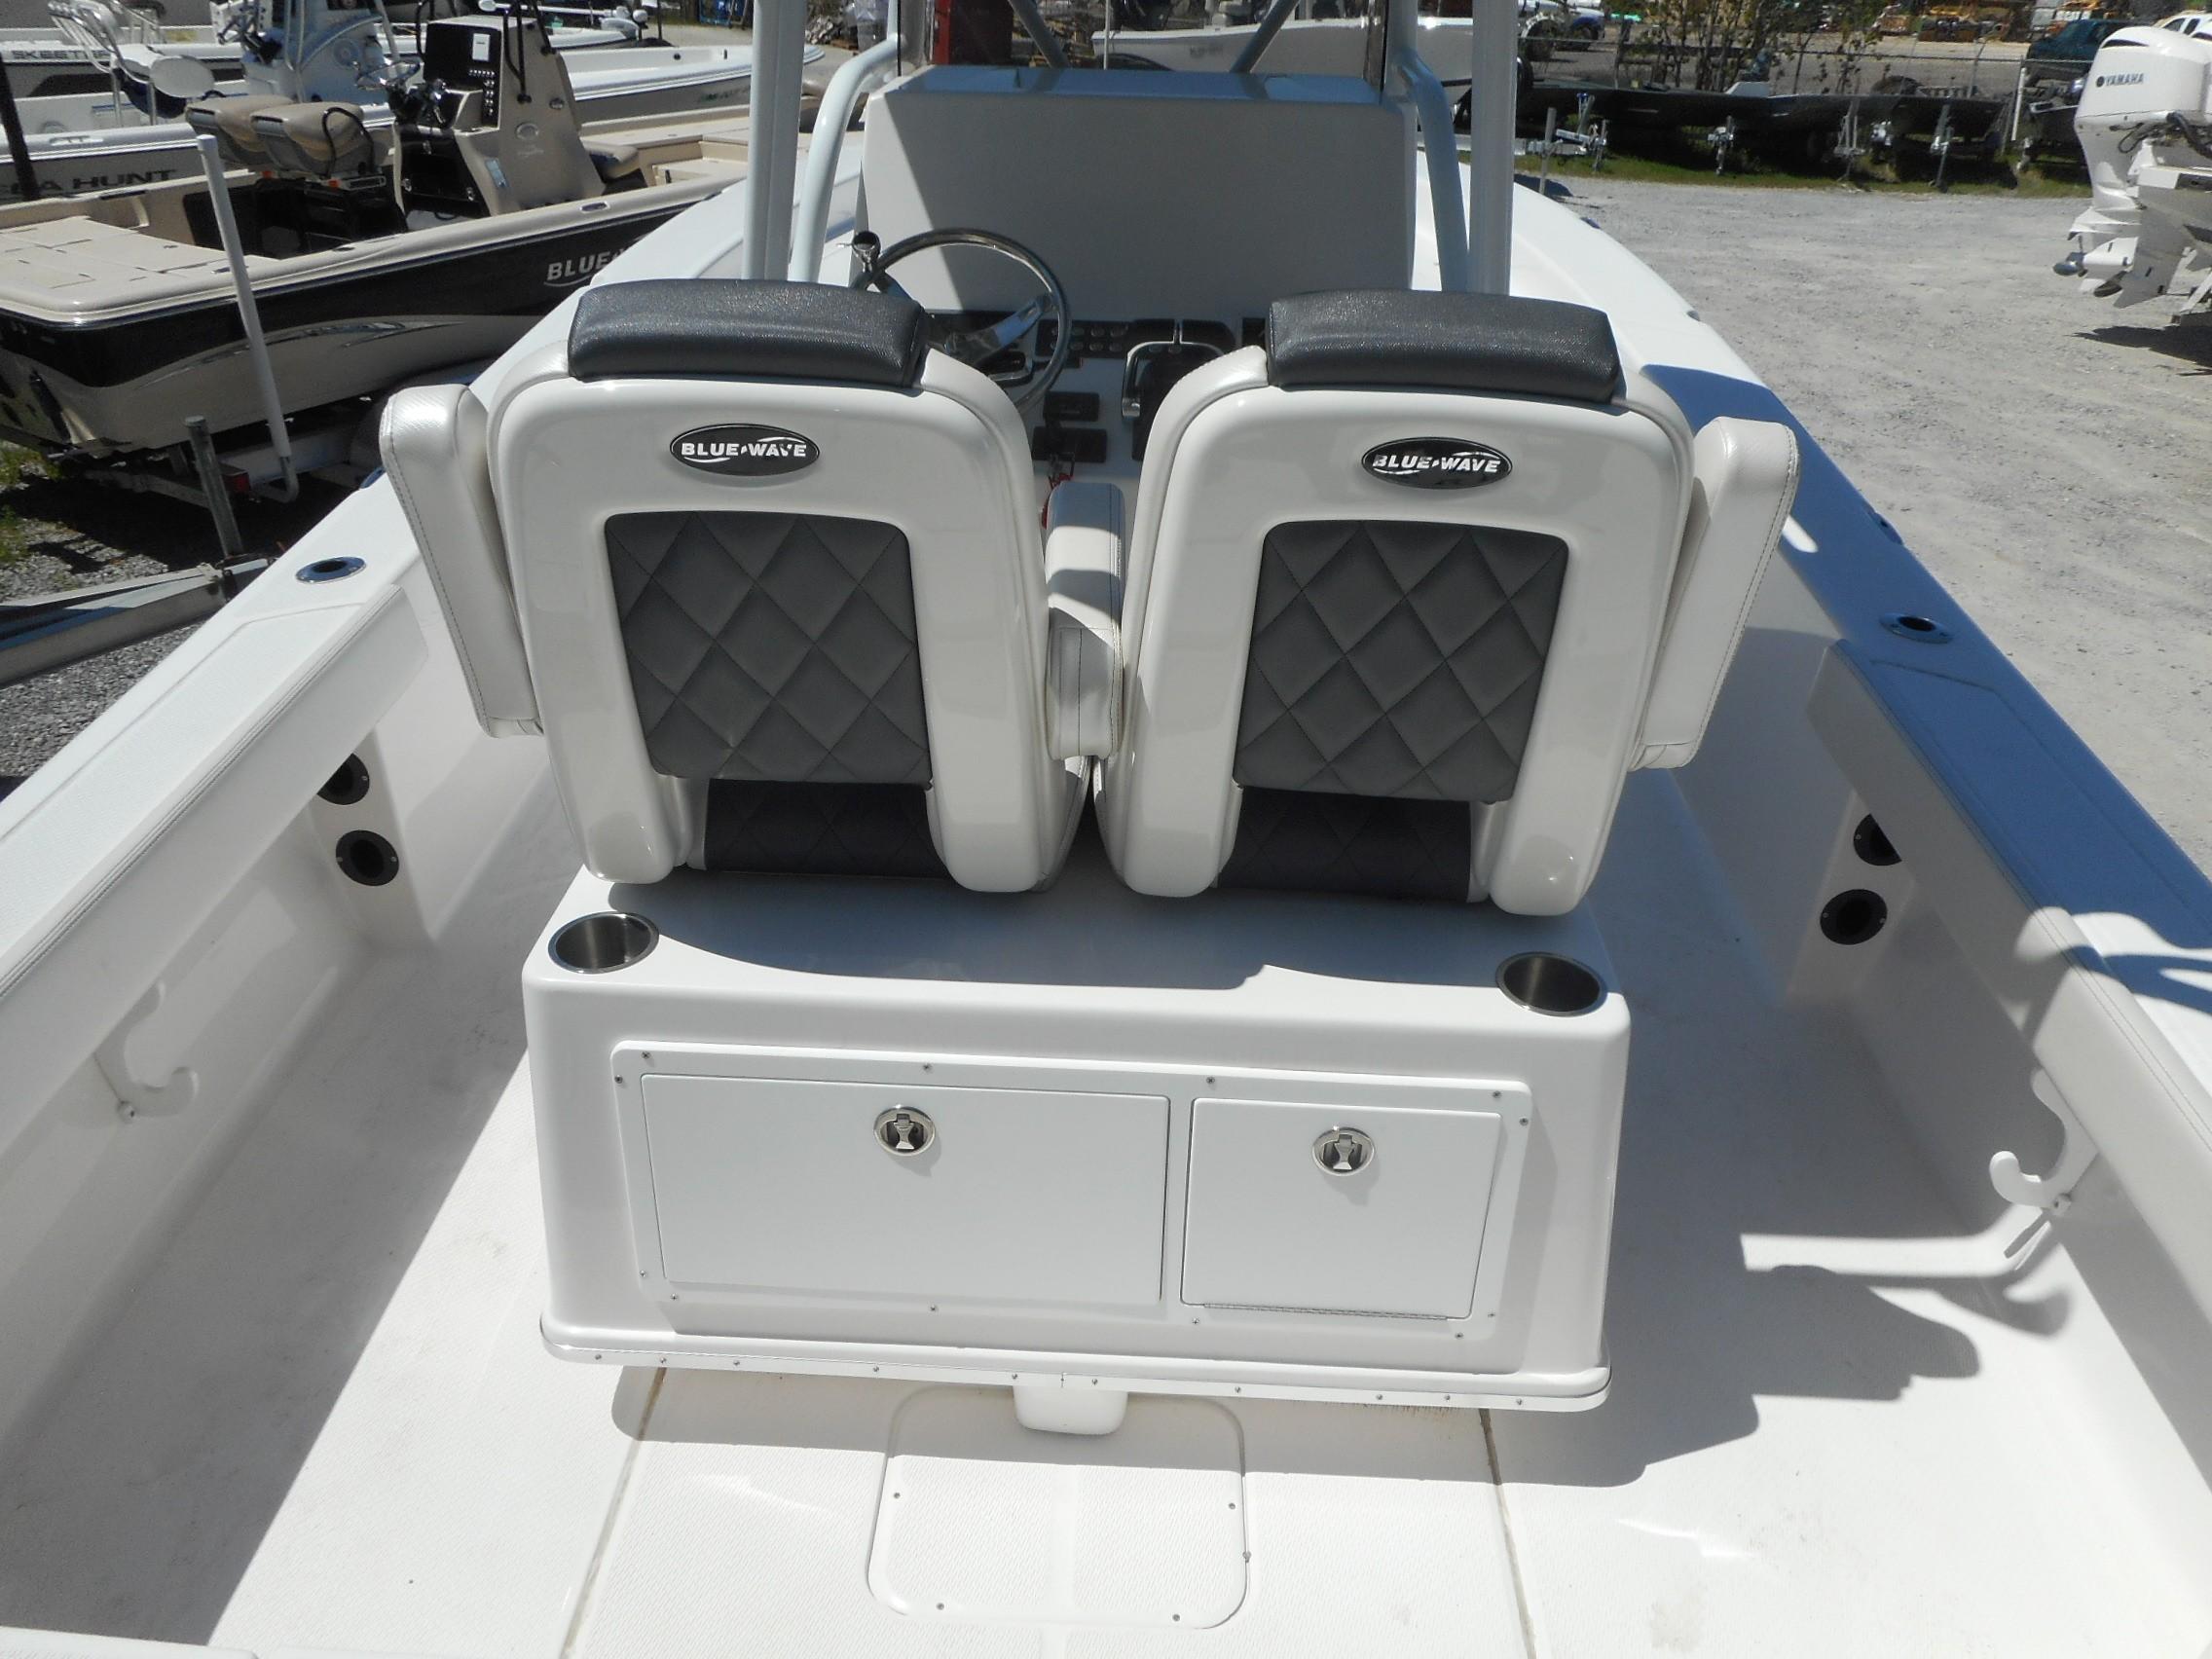 New  2019 27.17' Blue Wave 2800 Pure Hybrid Center Console in Slidell, Louisiana